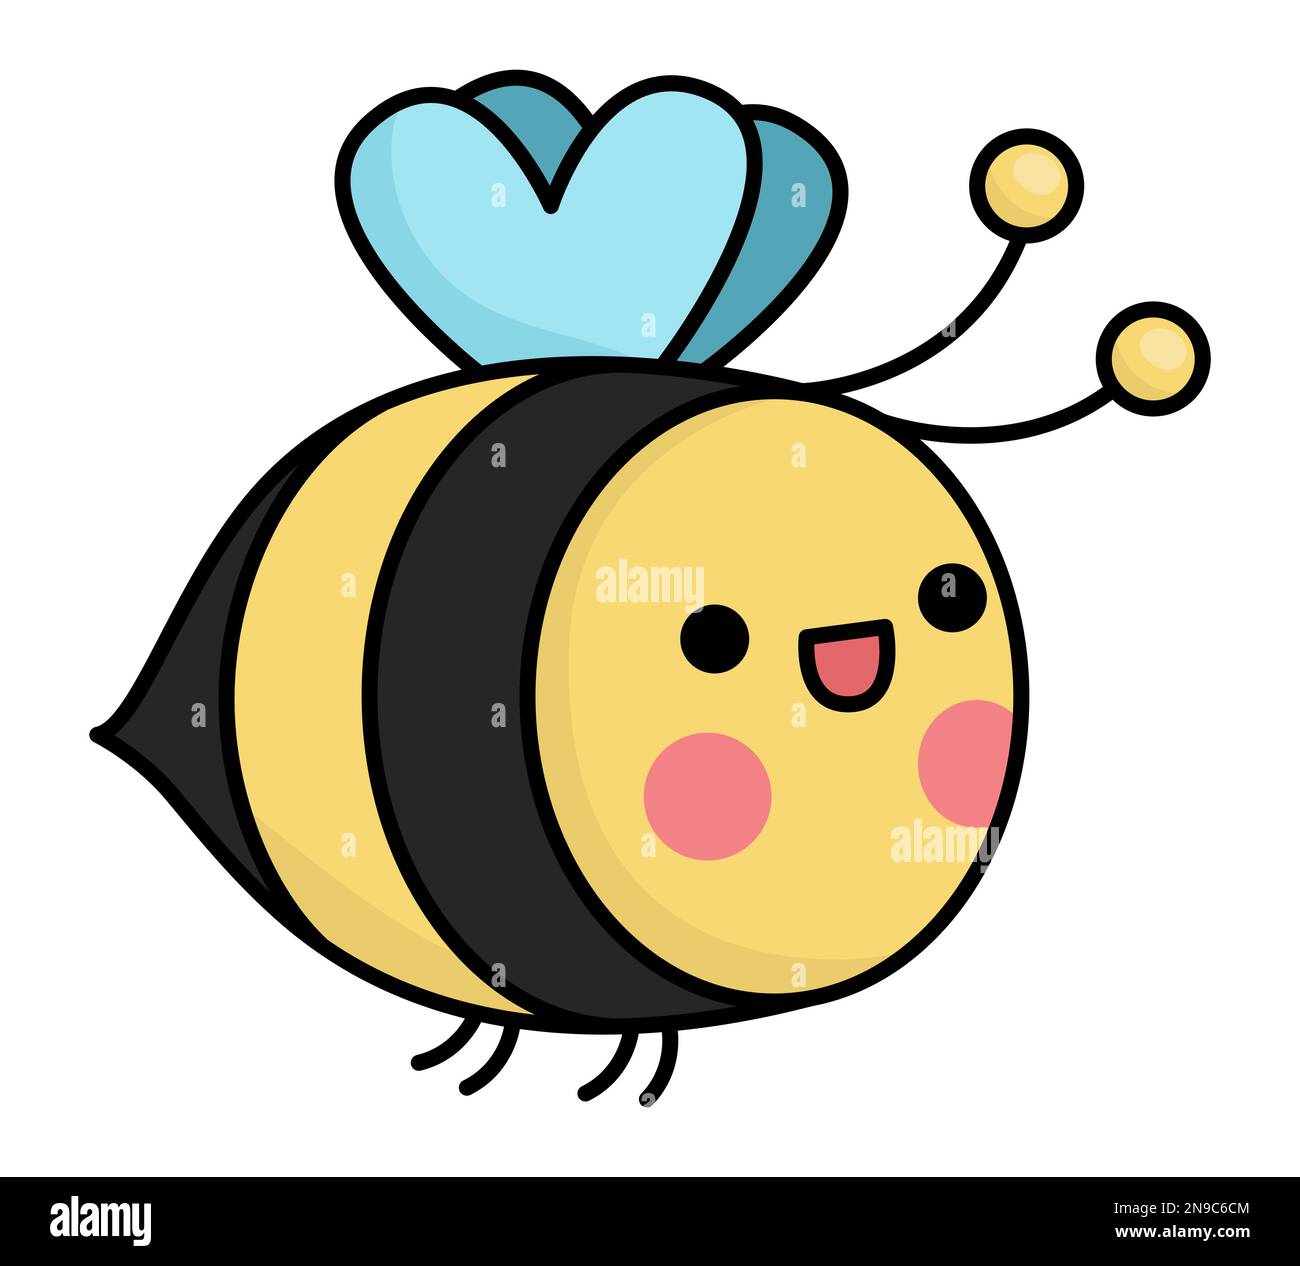 How To Draw a Cute Honey Bee Easy Step by Step Drawing for Kids | Apis,  art, drawing | How To Draw a Cute Honey Bee Easy Step by Step Drawing for